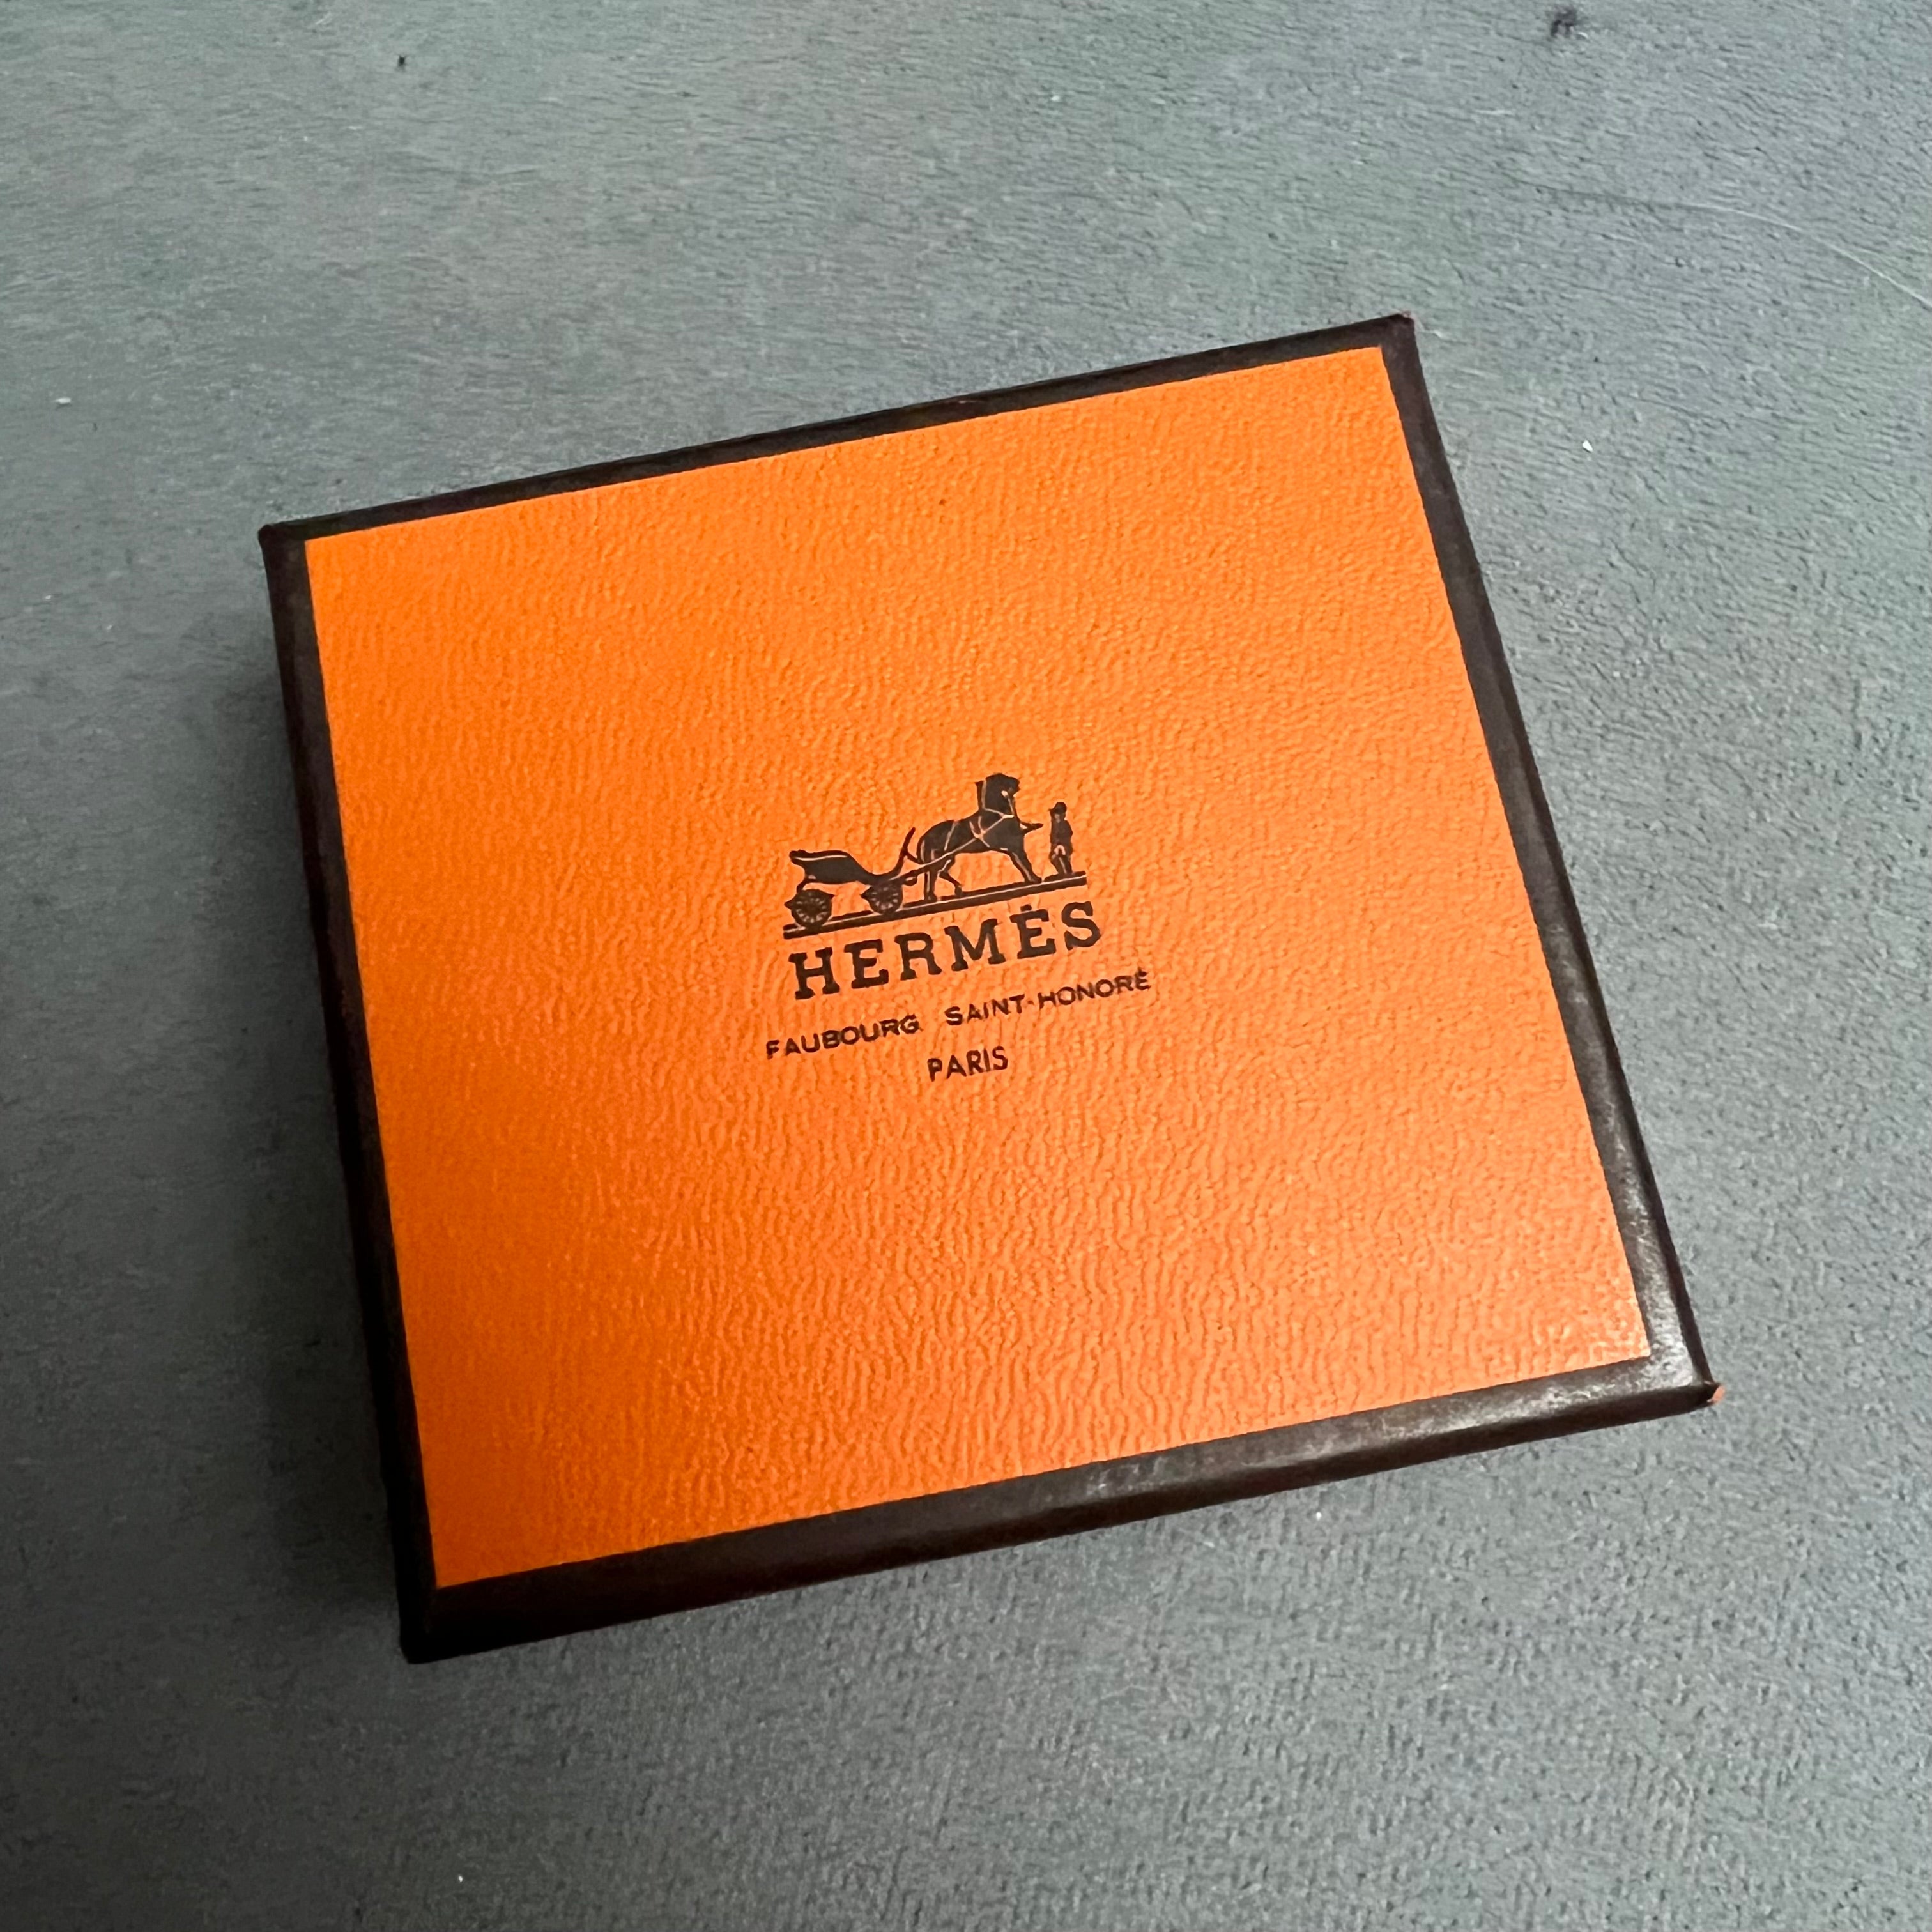 HERMES Goods Box 2.75x2.60x0.90 inches + Wrapping Paper